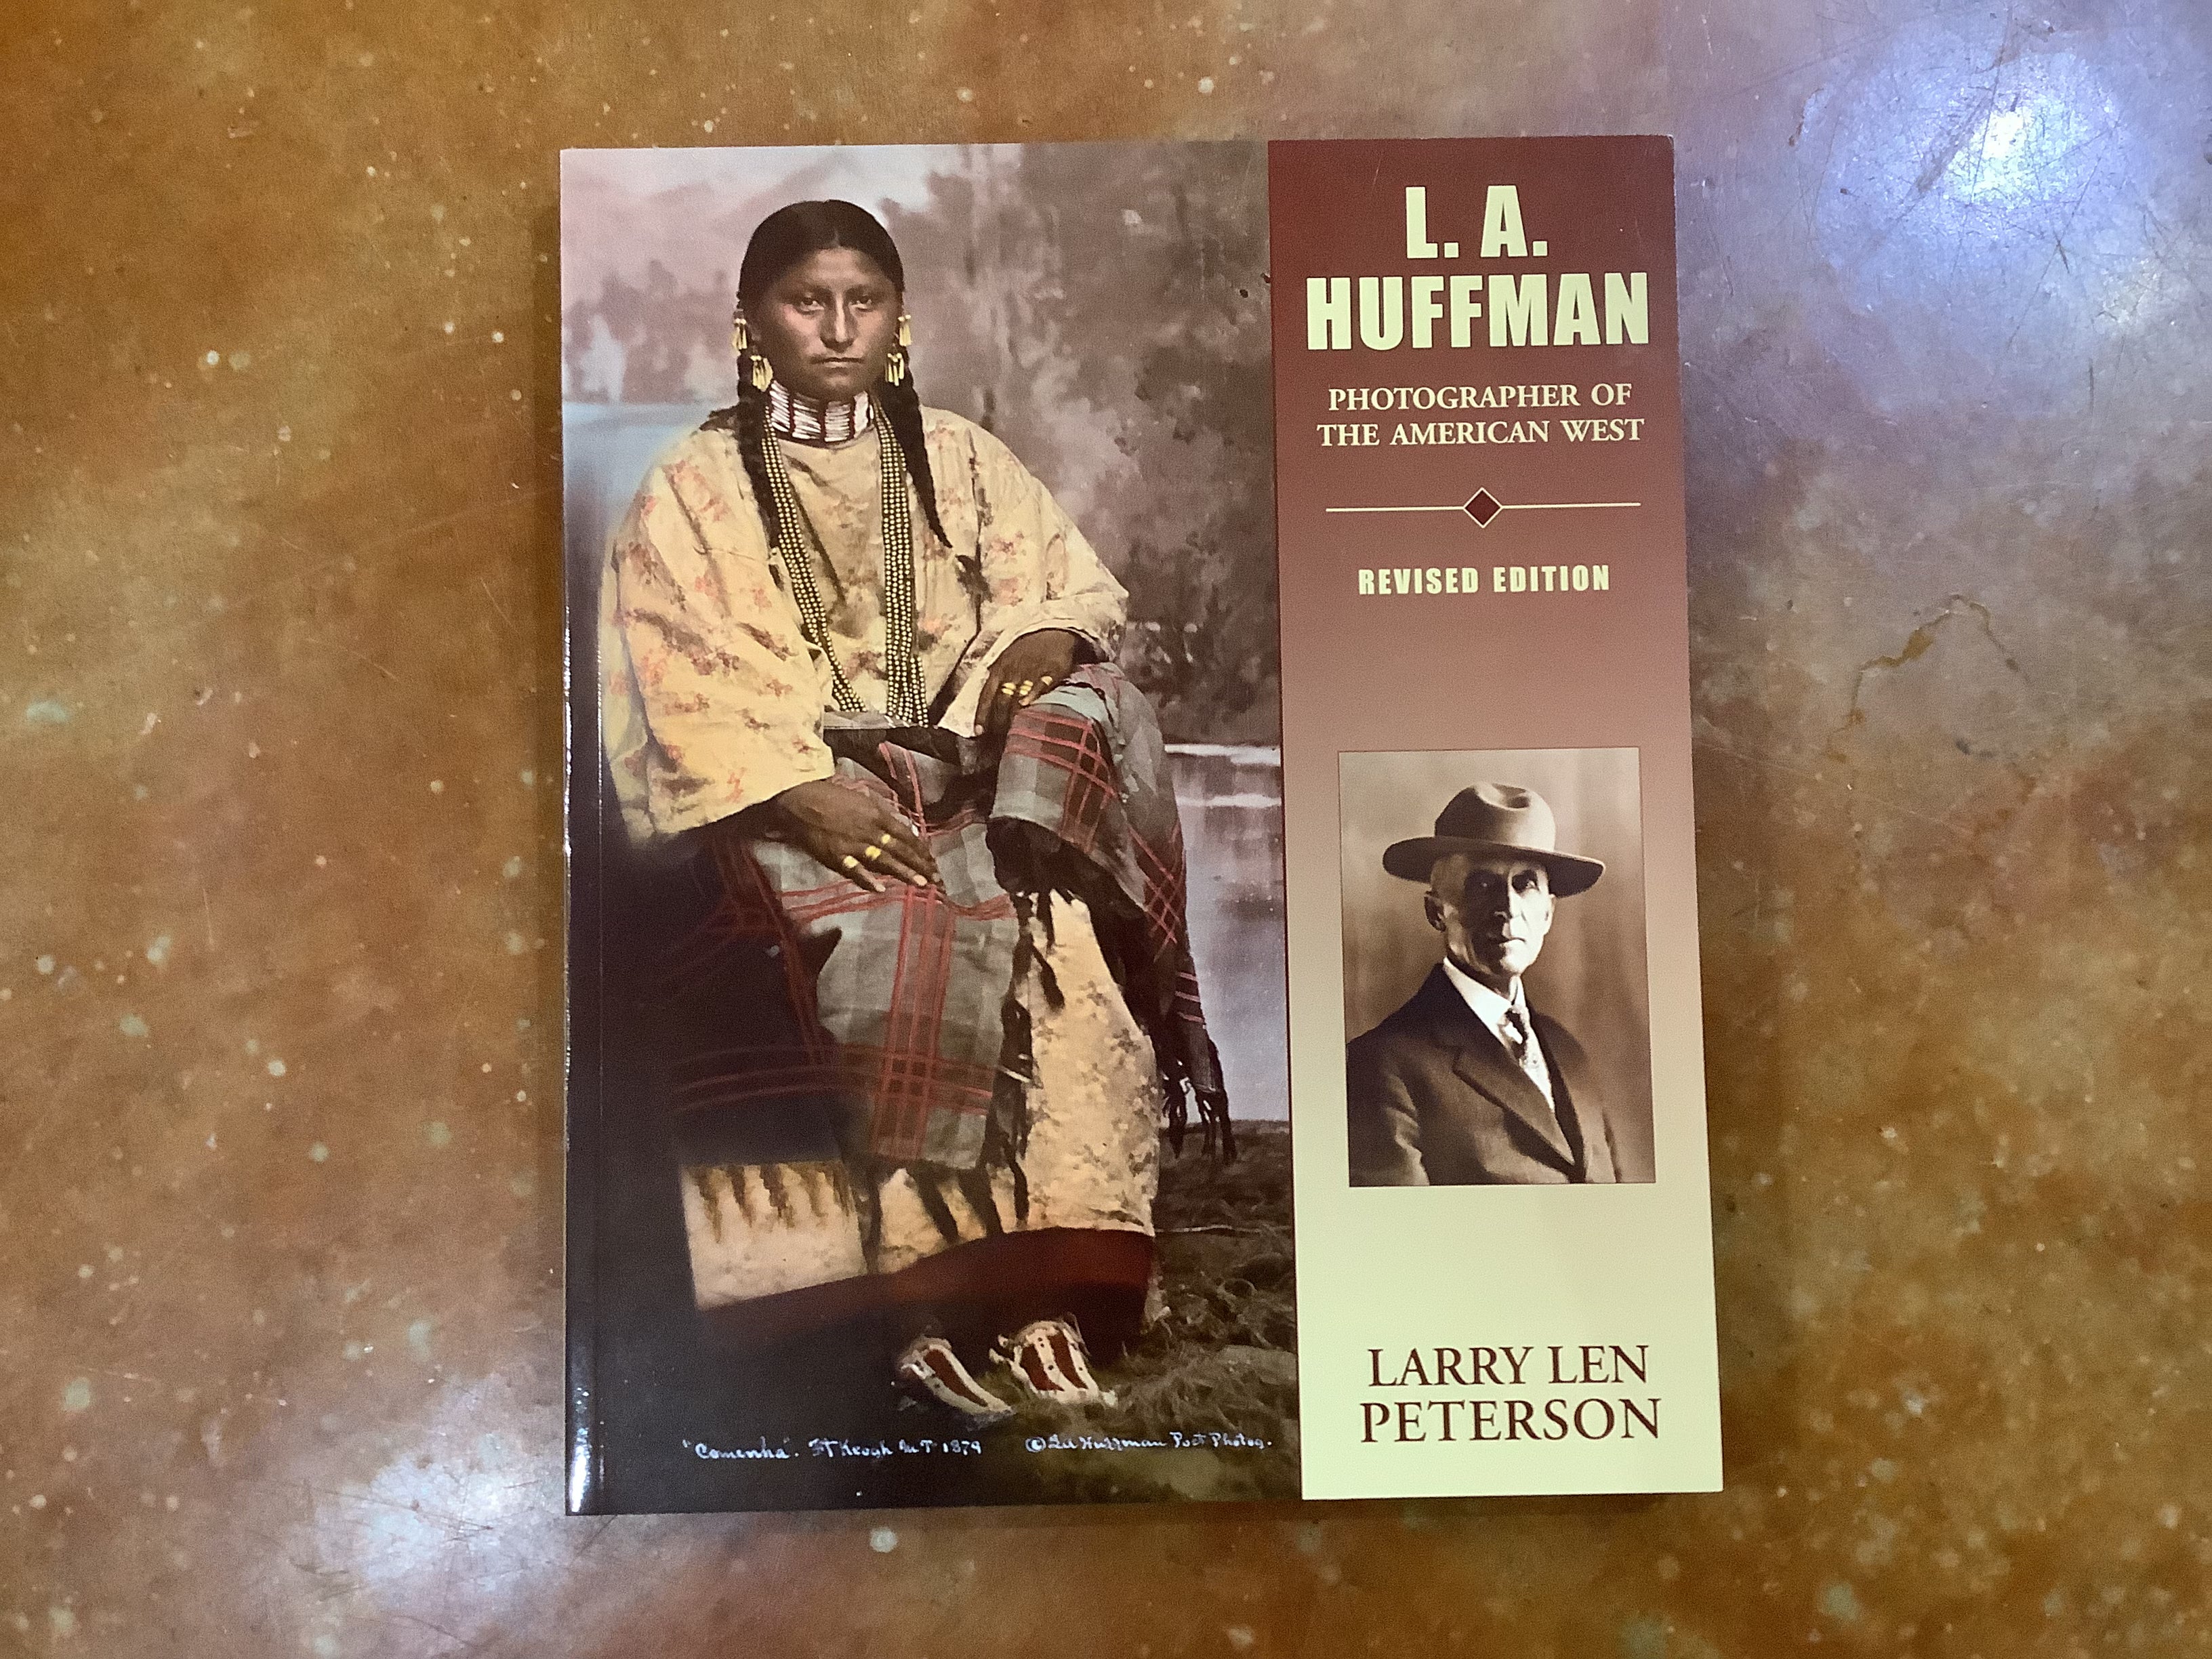 BOOKS - L.A. Huffman - Photographer of the American West